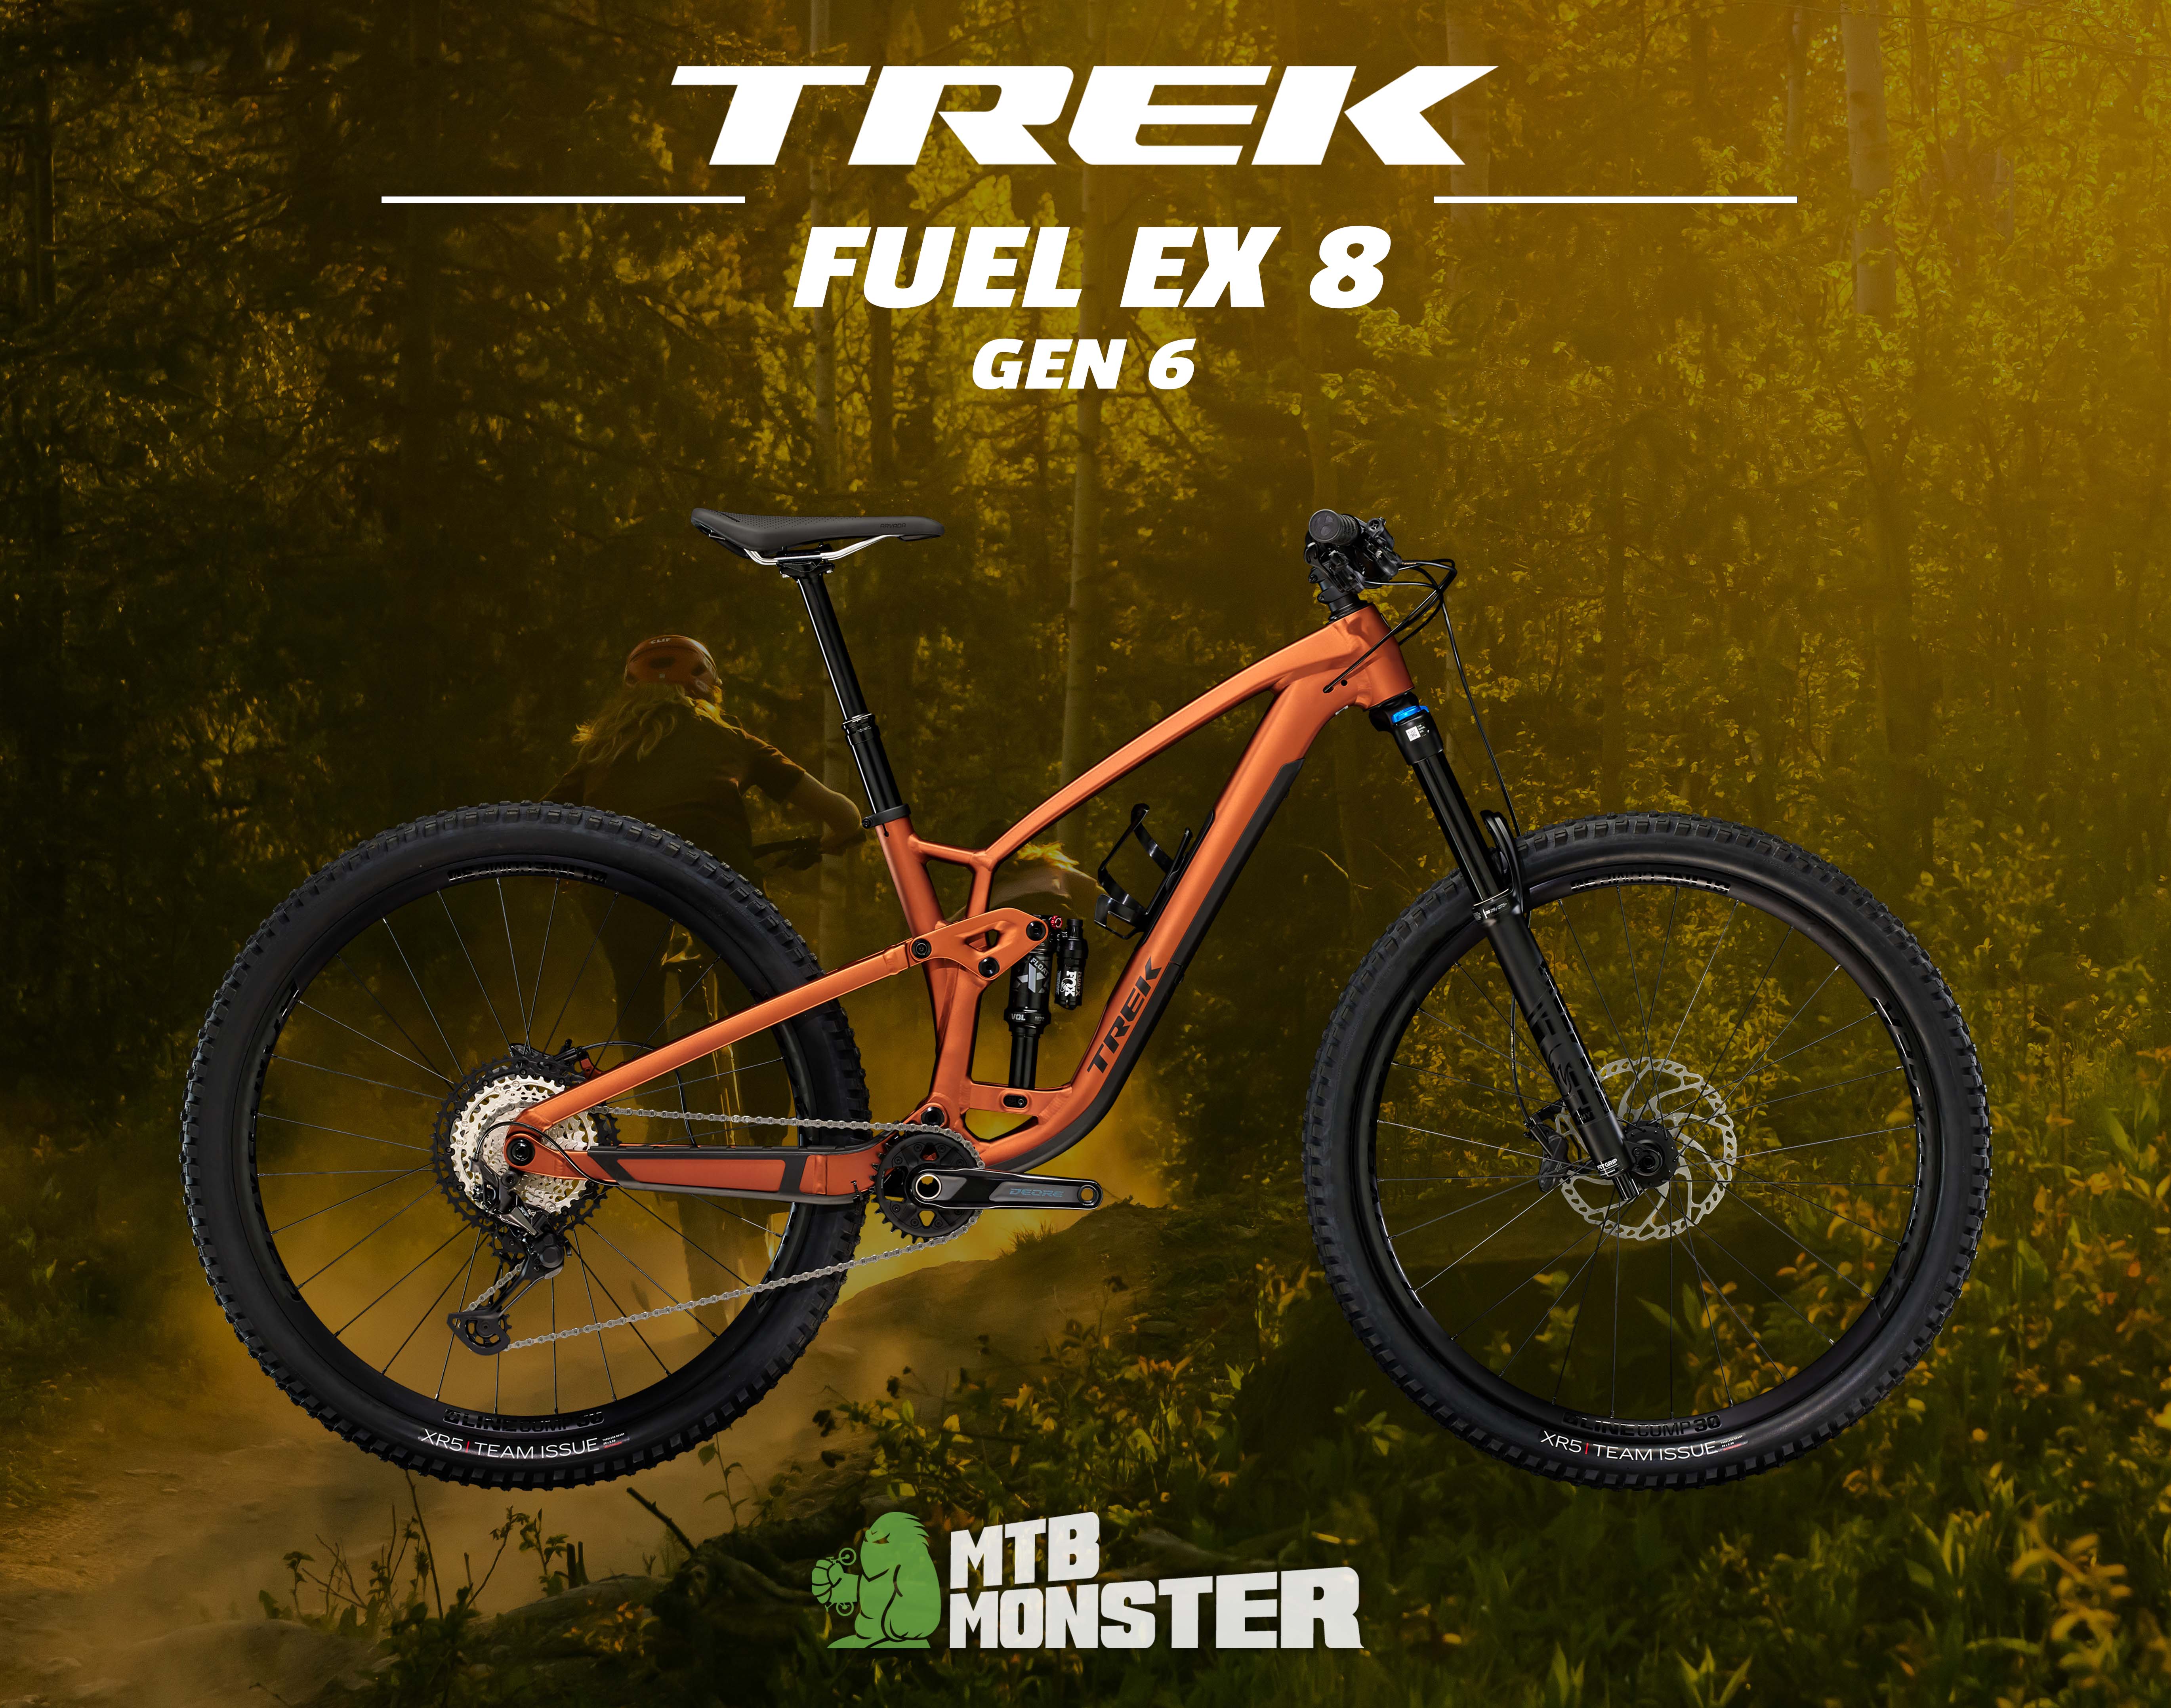 The all new Trek Fuel EX 8 6th Gen has Just launched on our website!